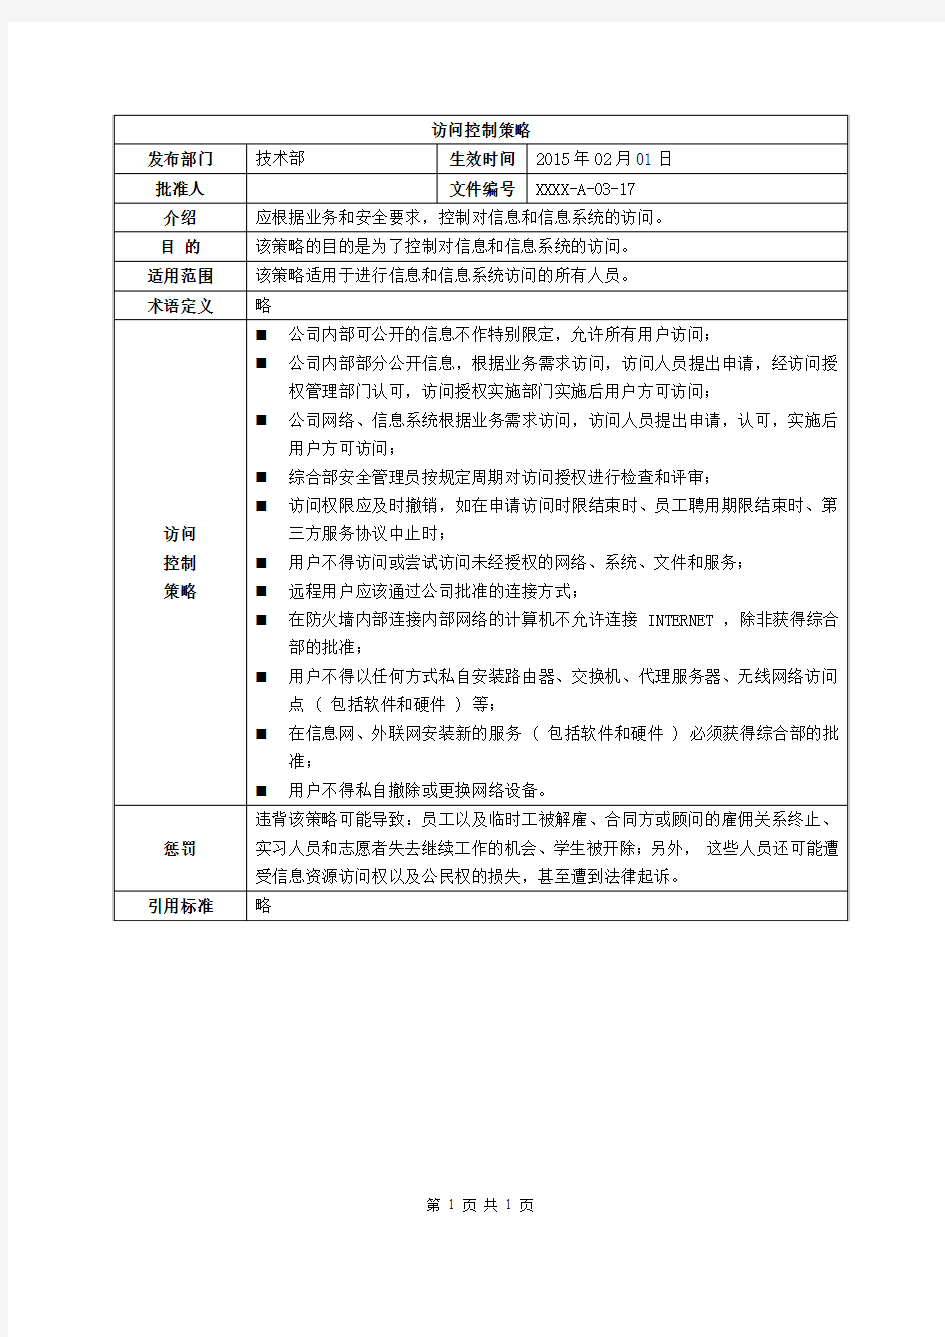 ISO27001：2013访问控制策略